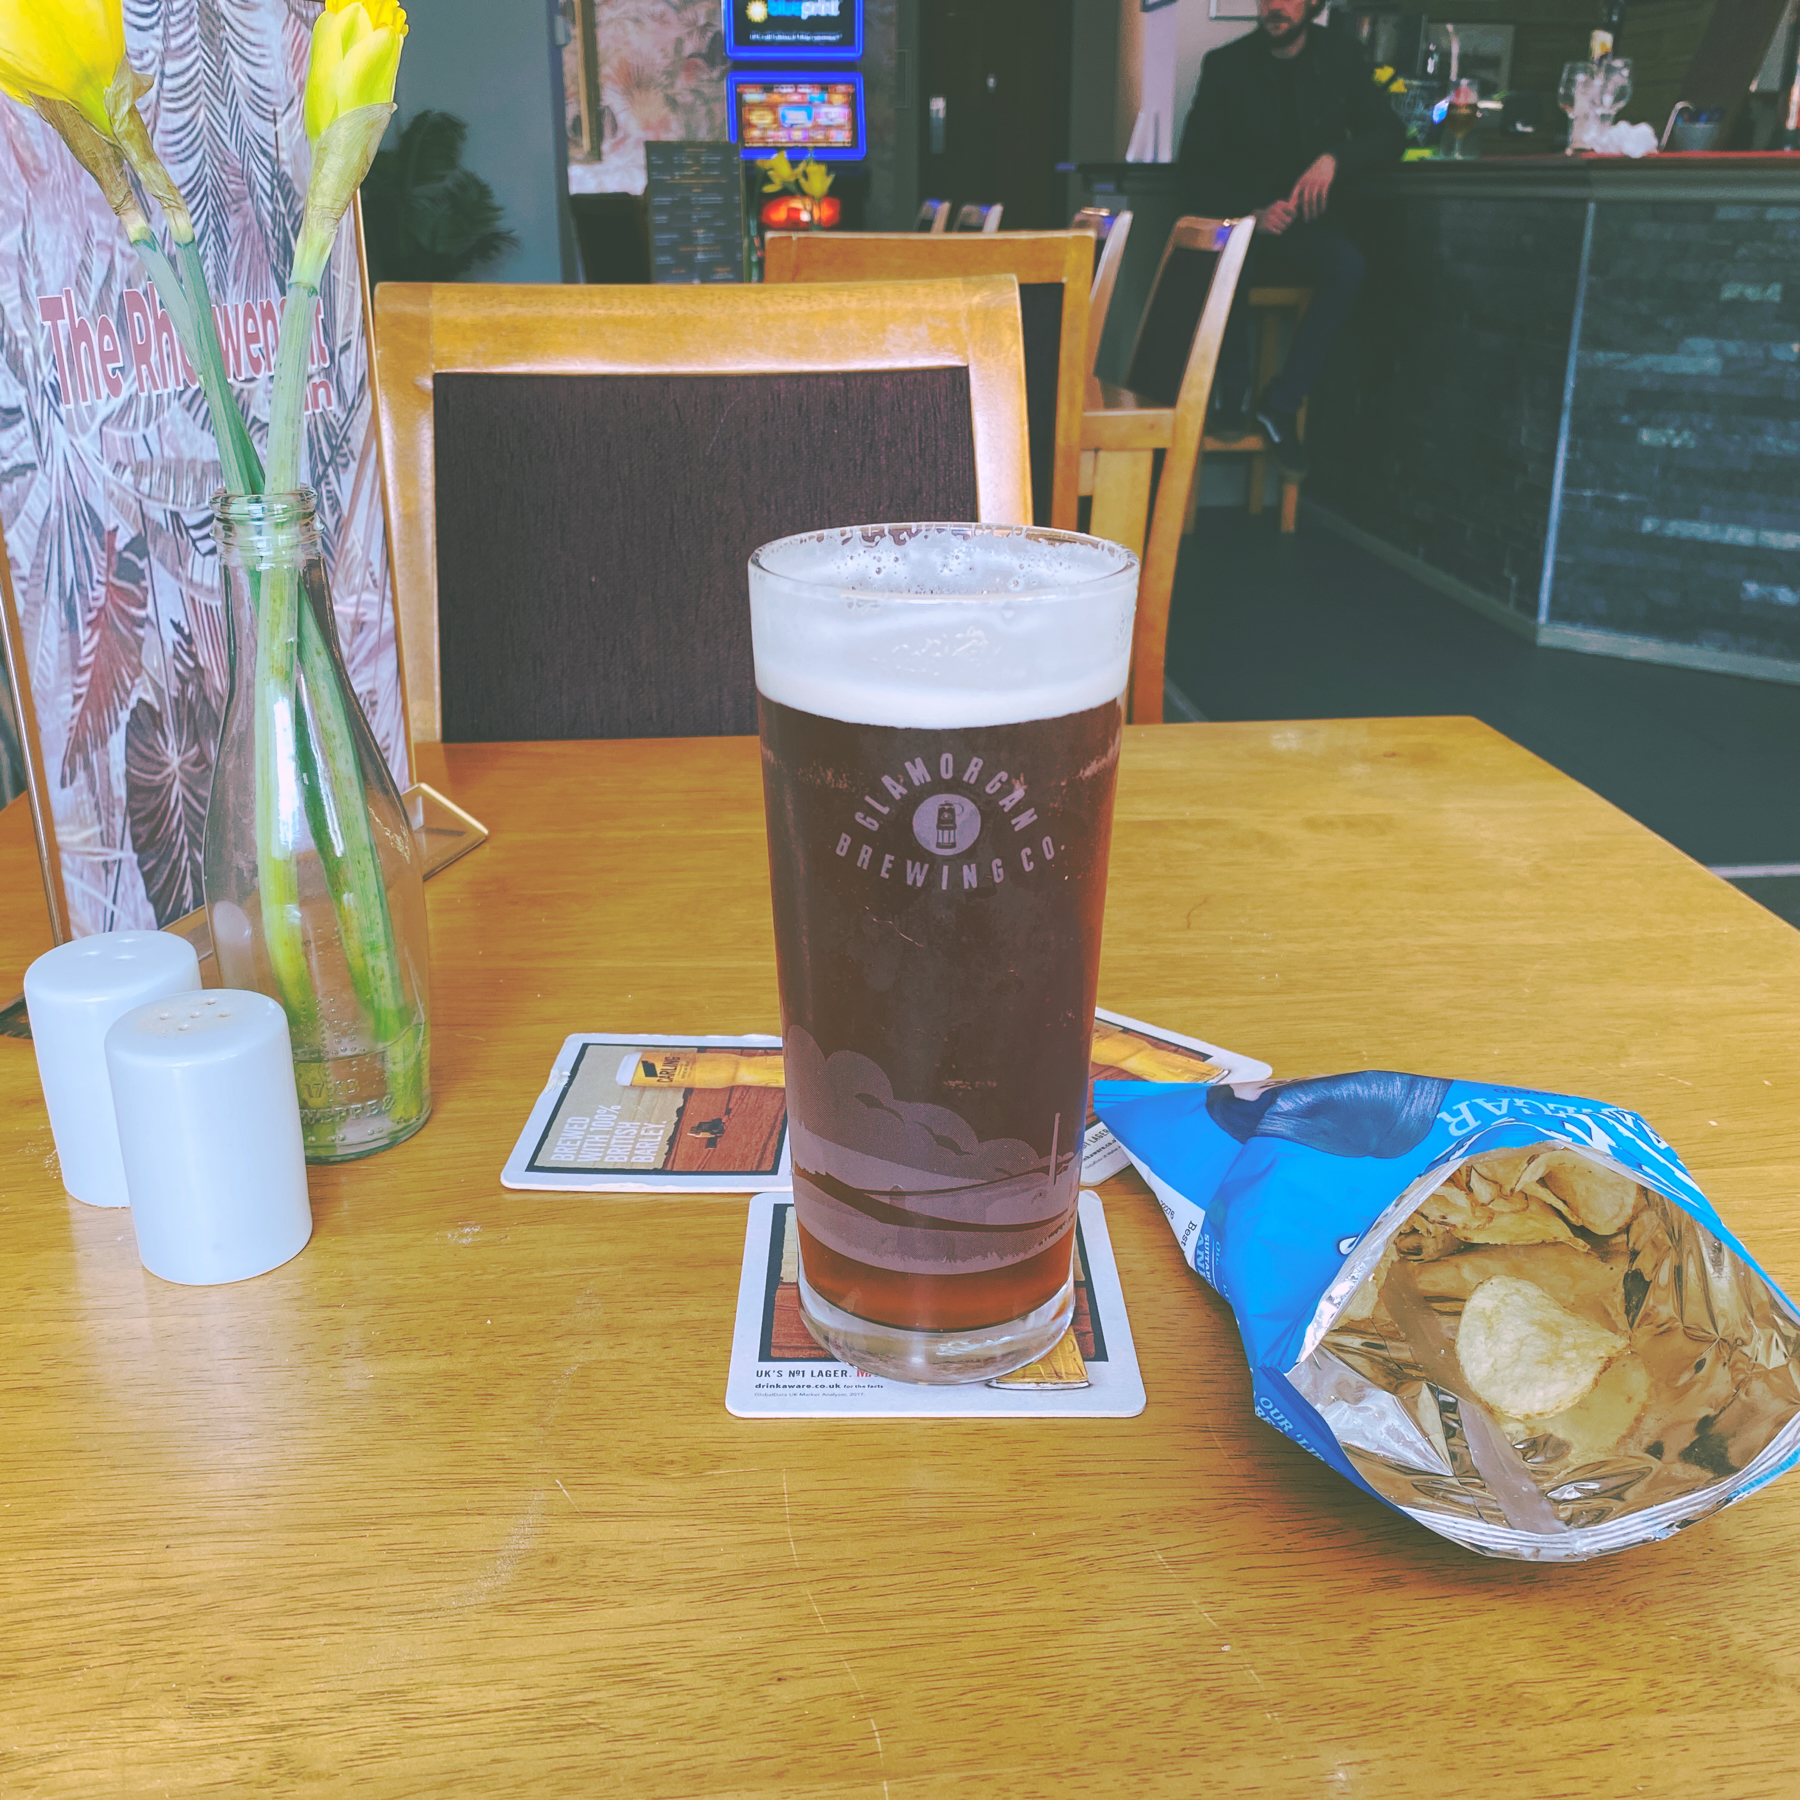 Pint of beer next to a packet of crisps